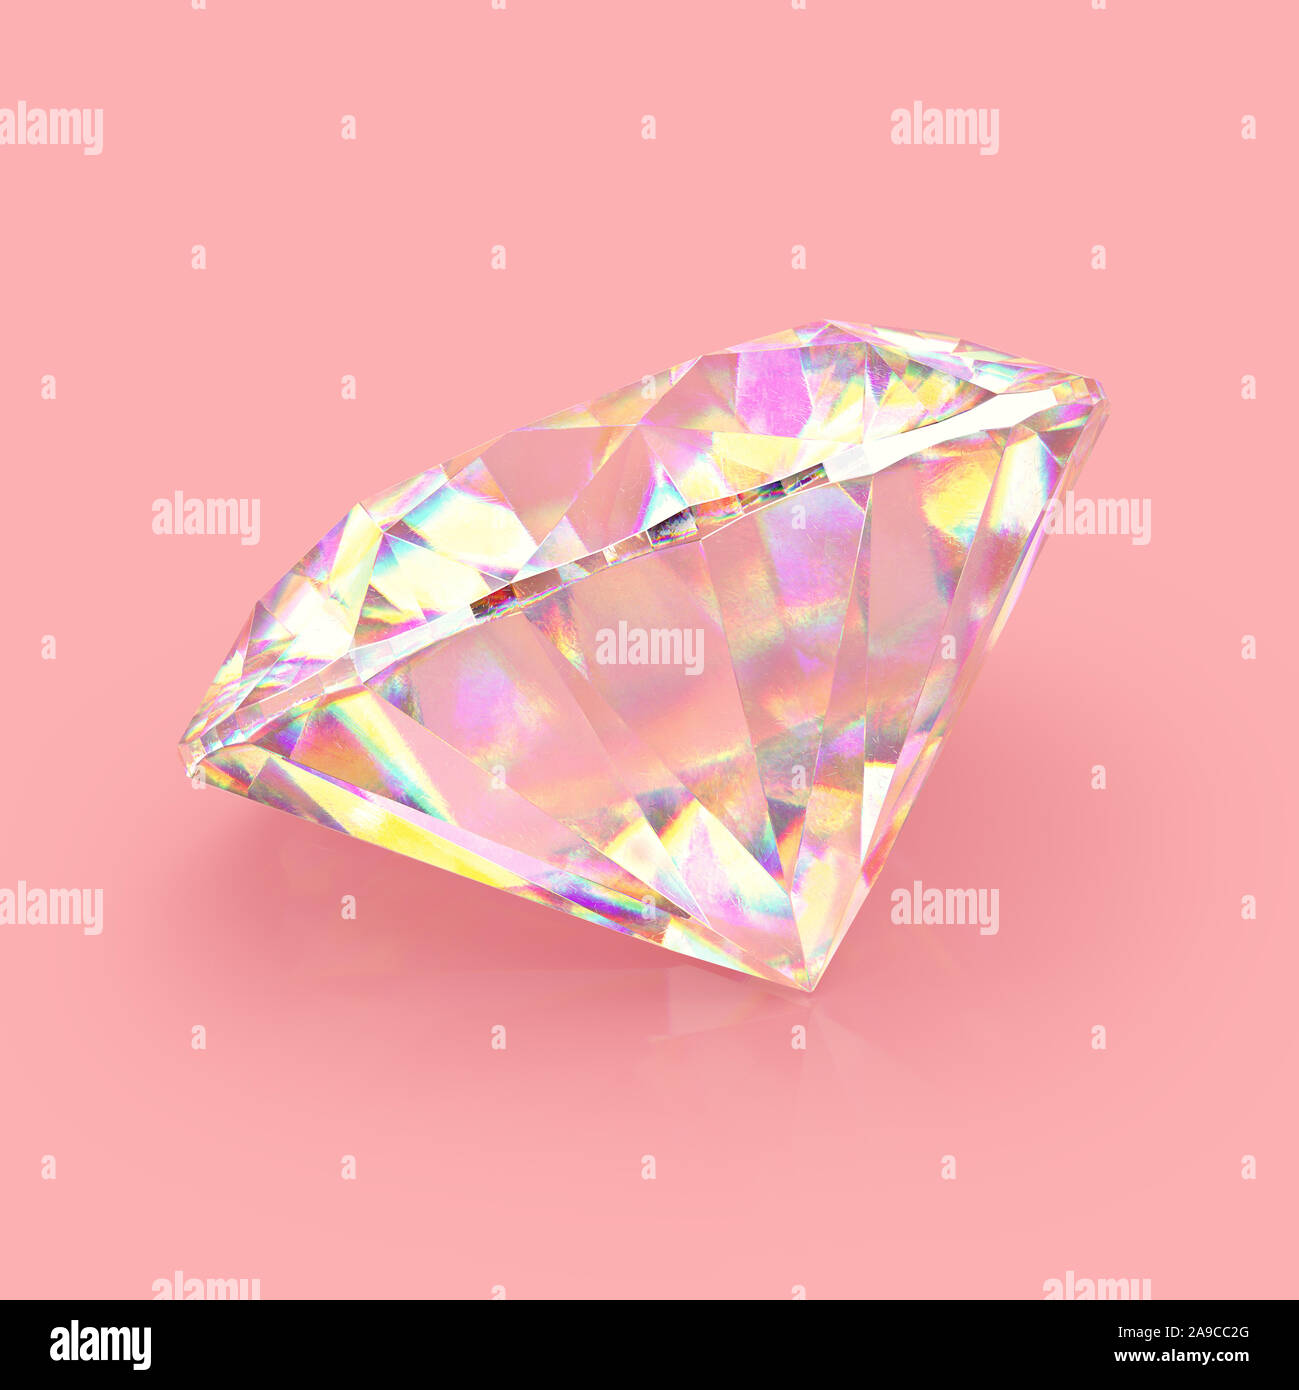 Shimmering shiny sparkling realistic diamond on pink background. Scratches and imperfections on the surface. 3D rendering. Stock Photo